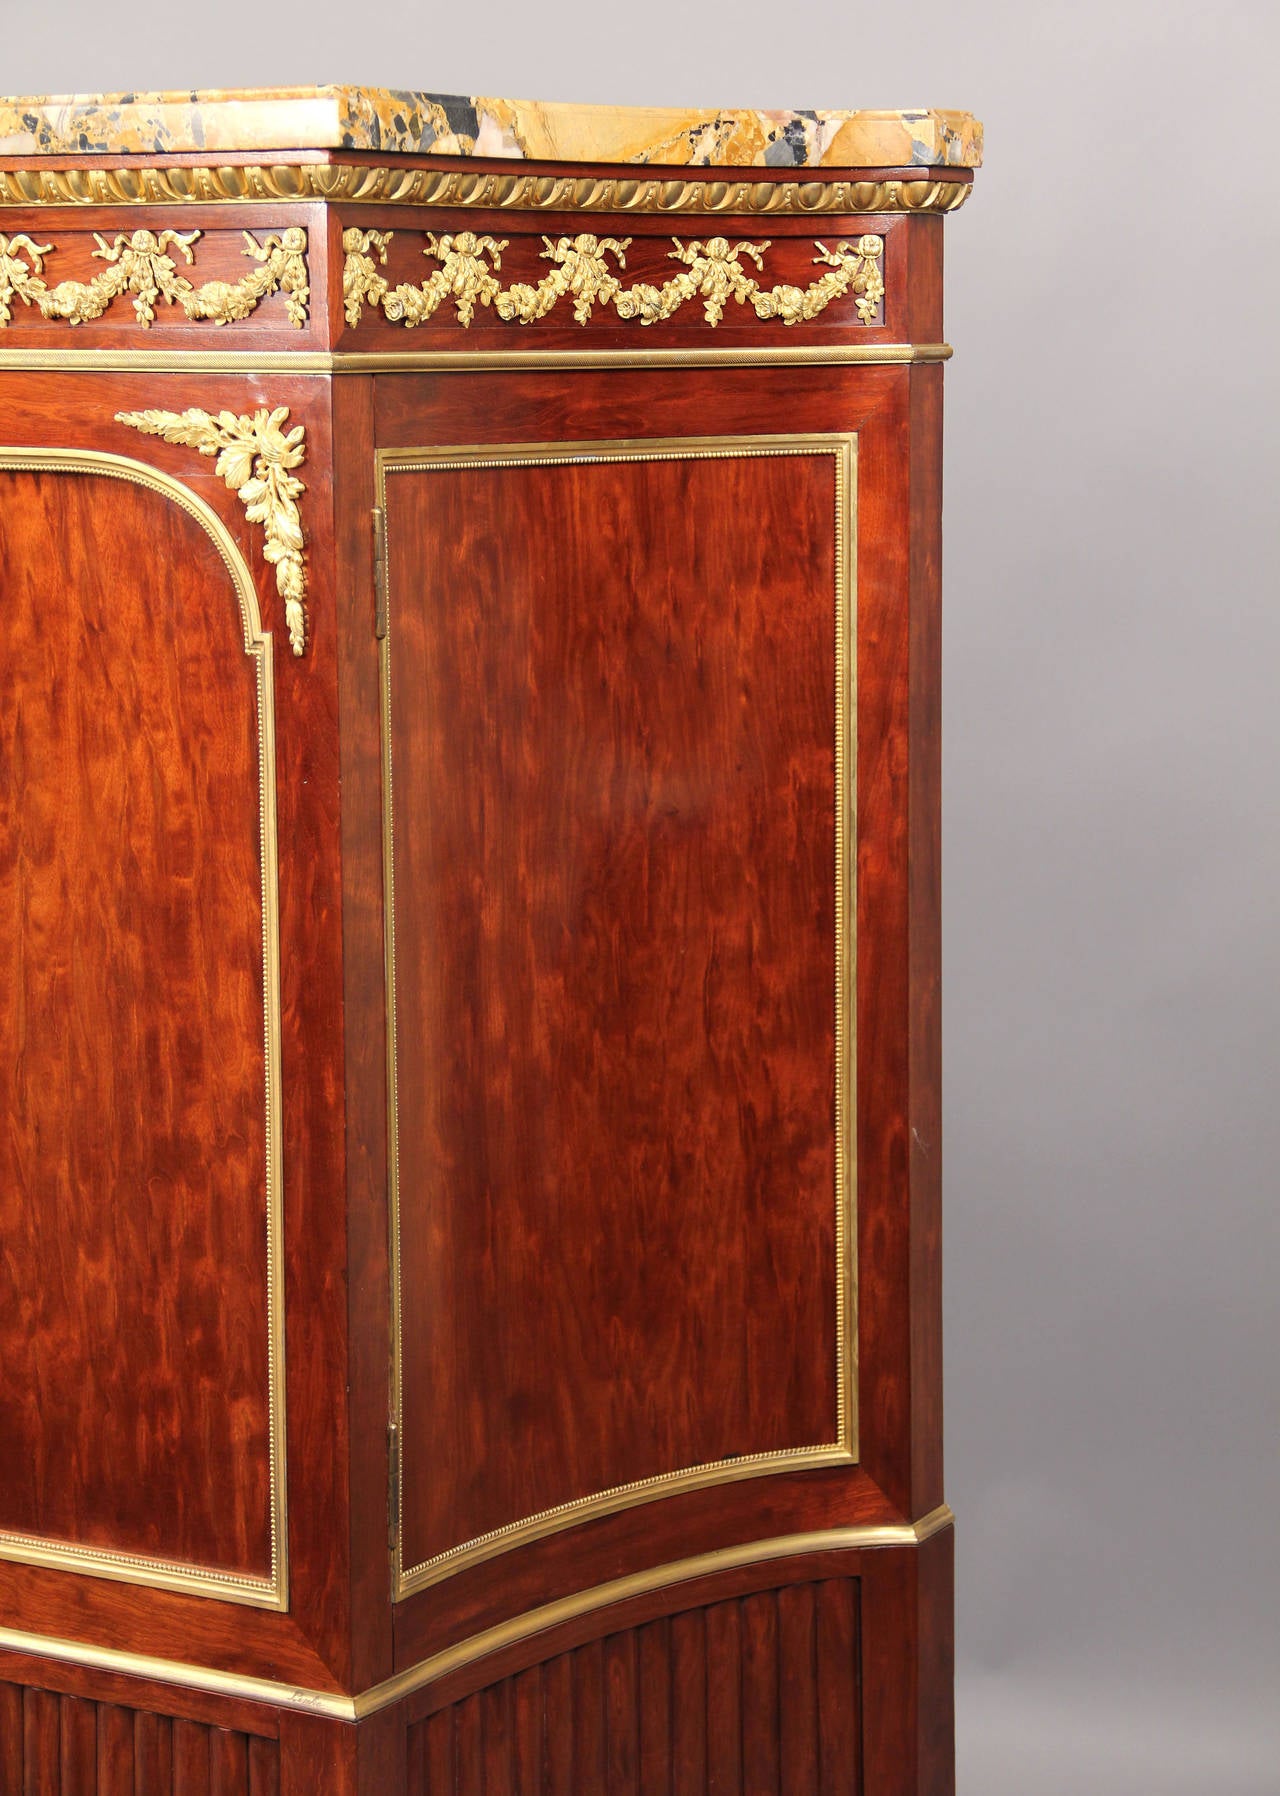 French Late 19th Century Gilt Bronze-Mounted Cabinet by François Linke For Sale